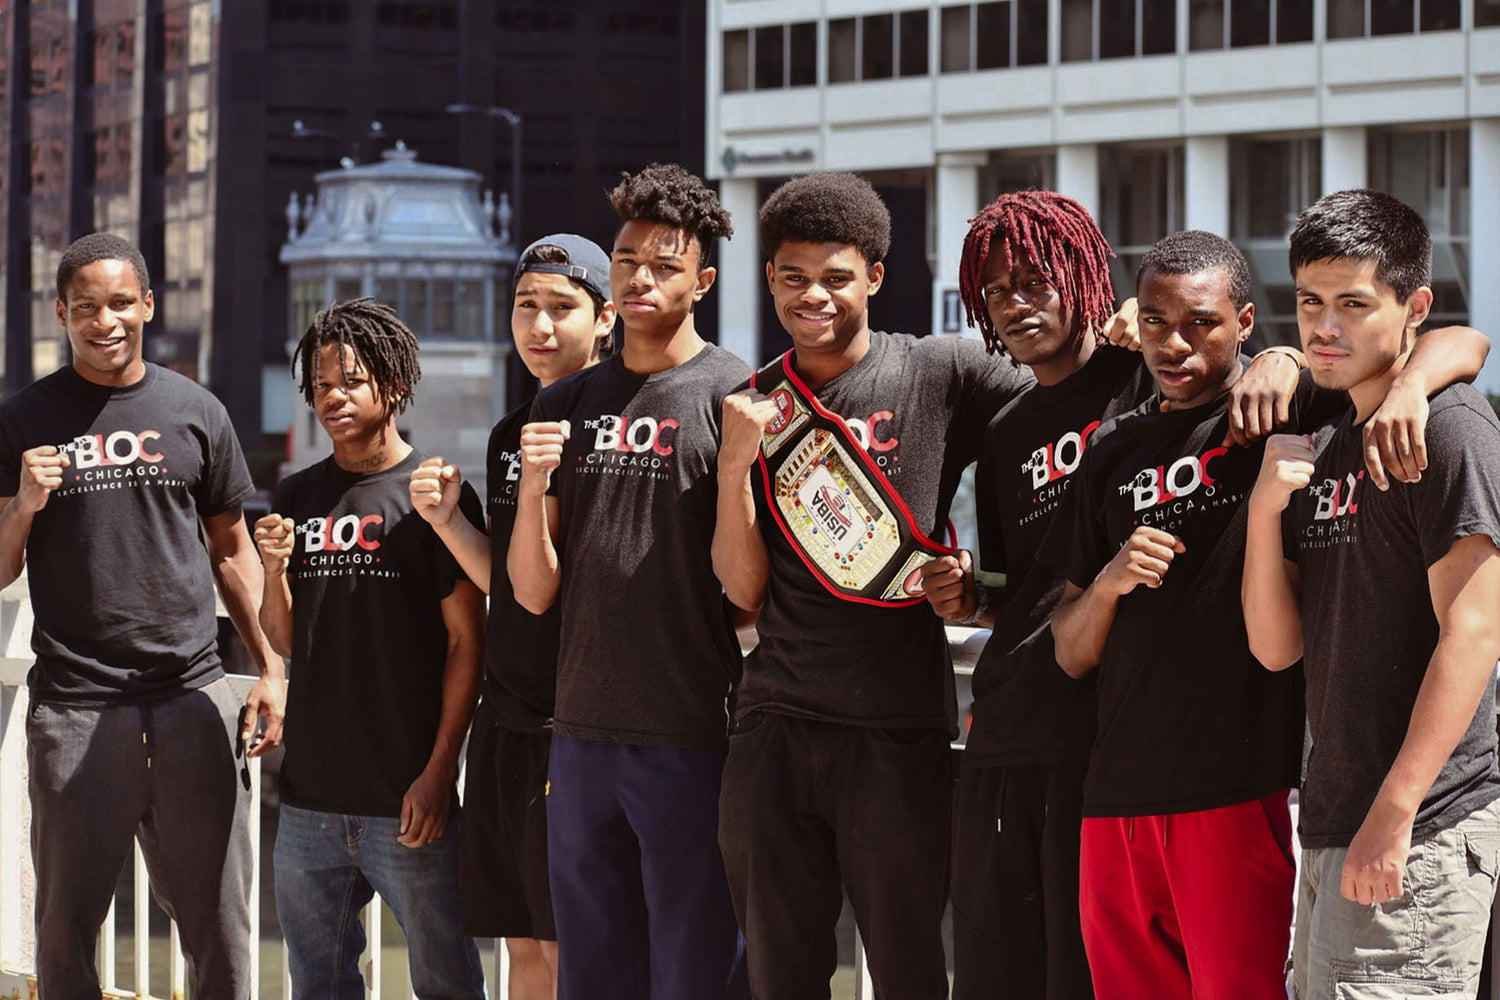 Learn about The Bloc – The Bloc Chicago